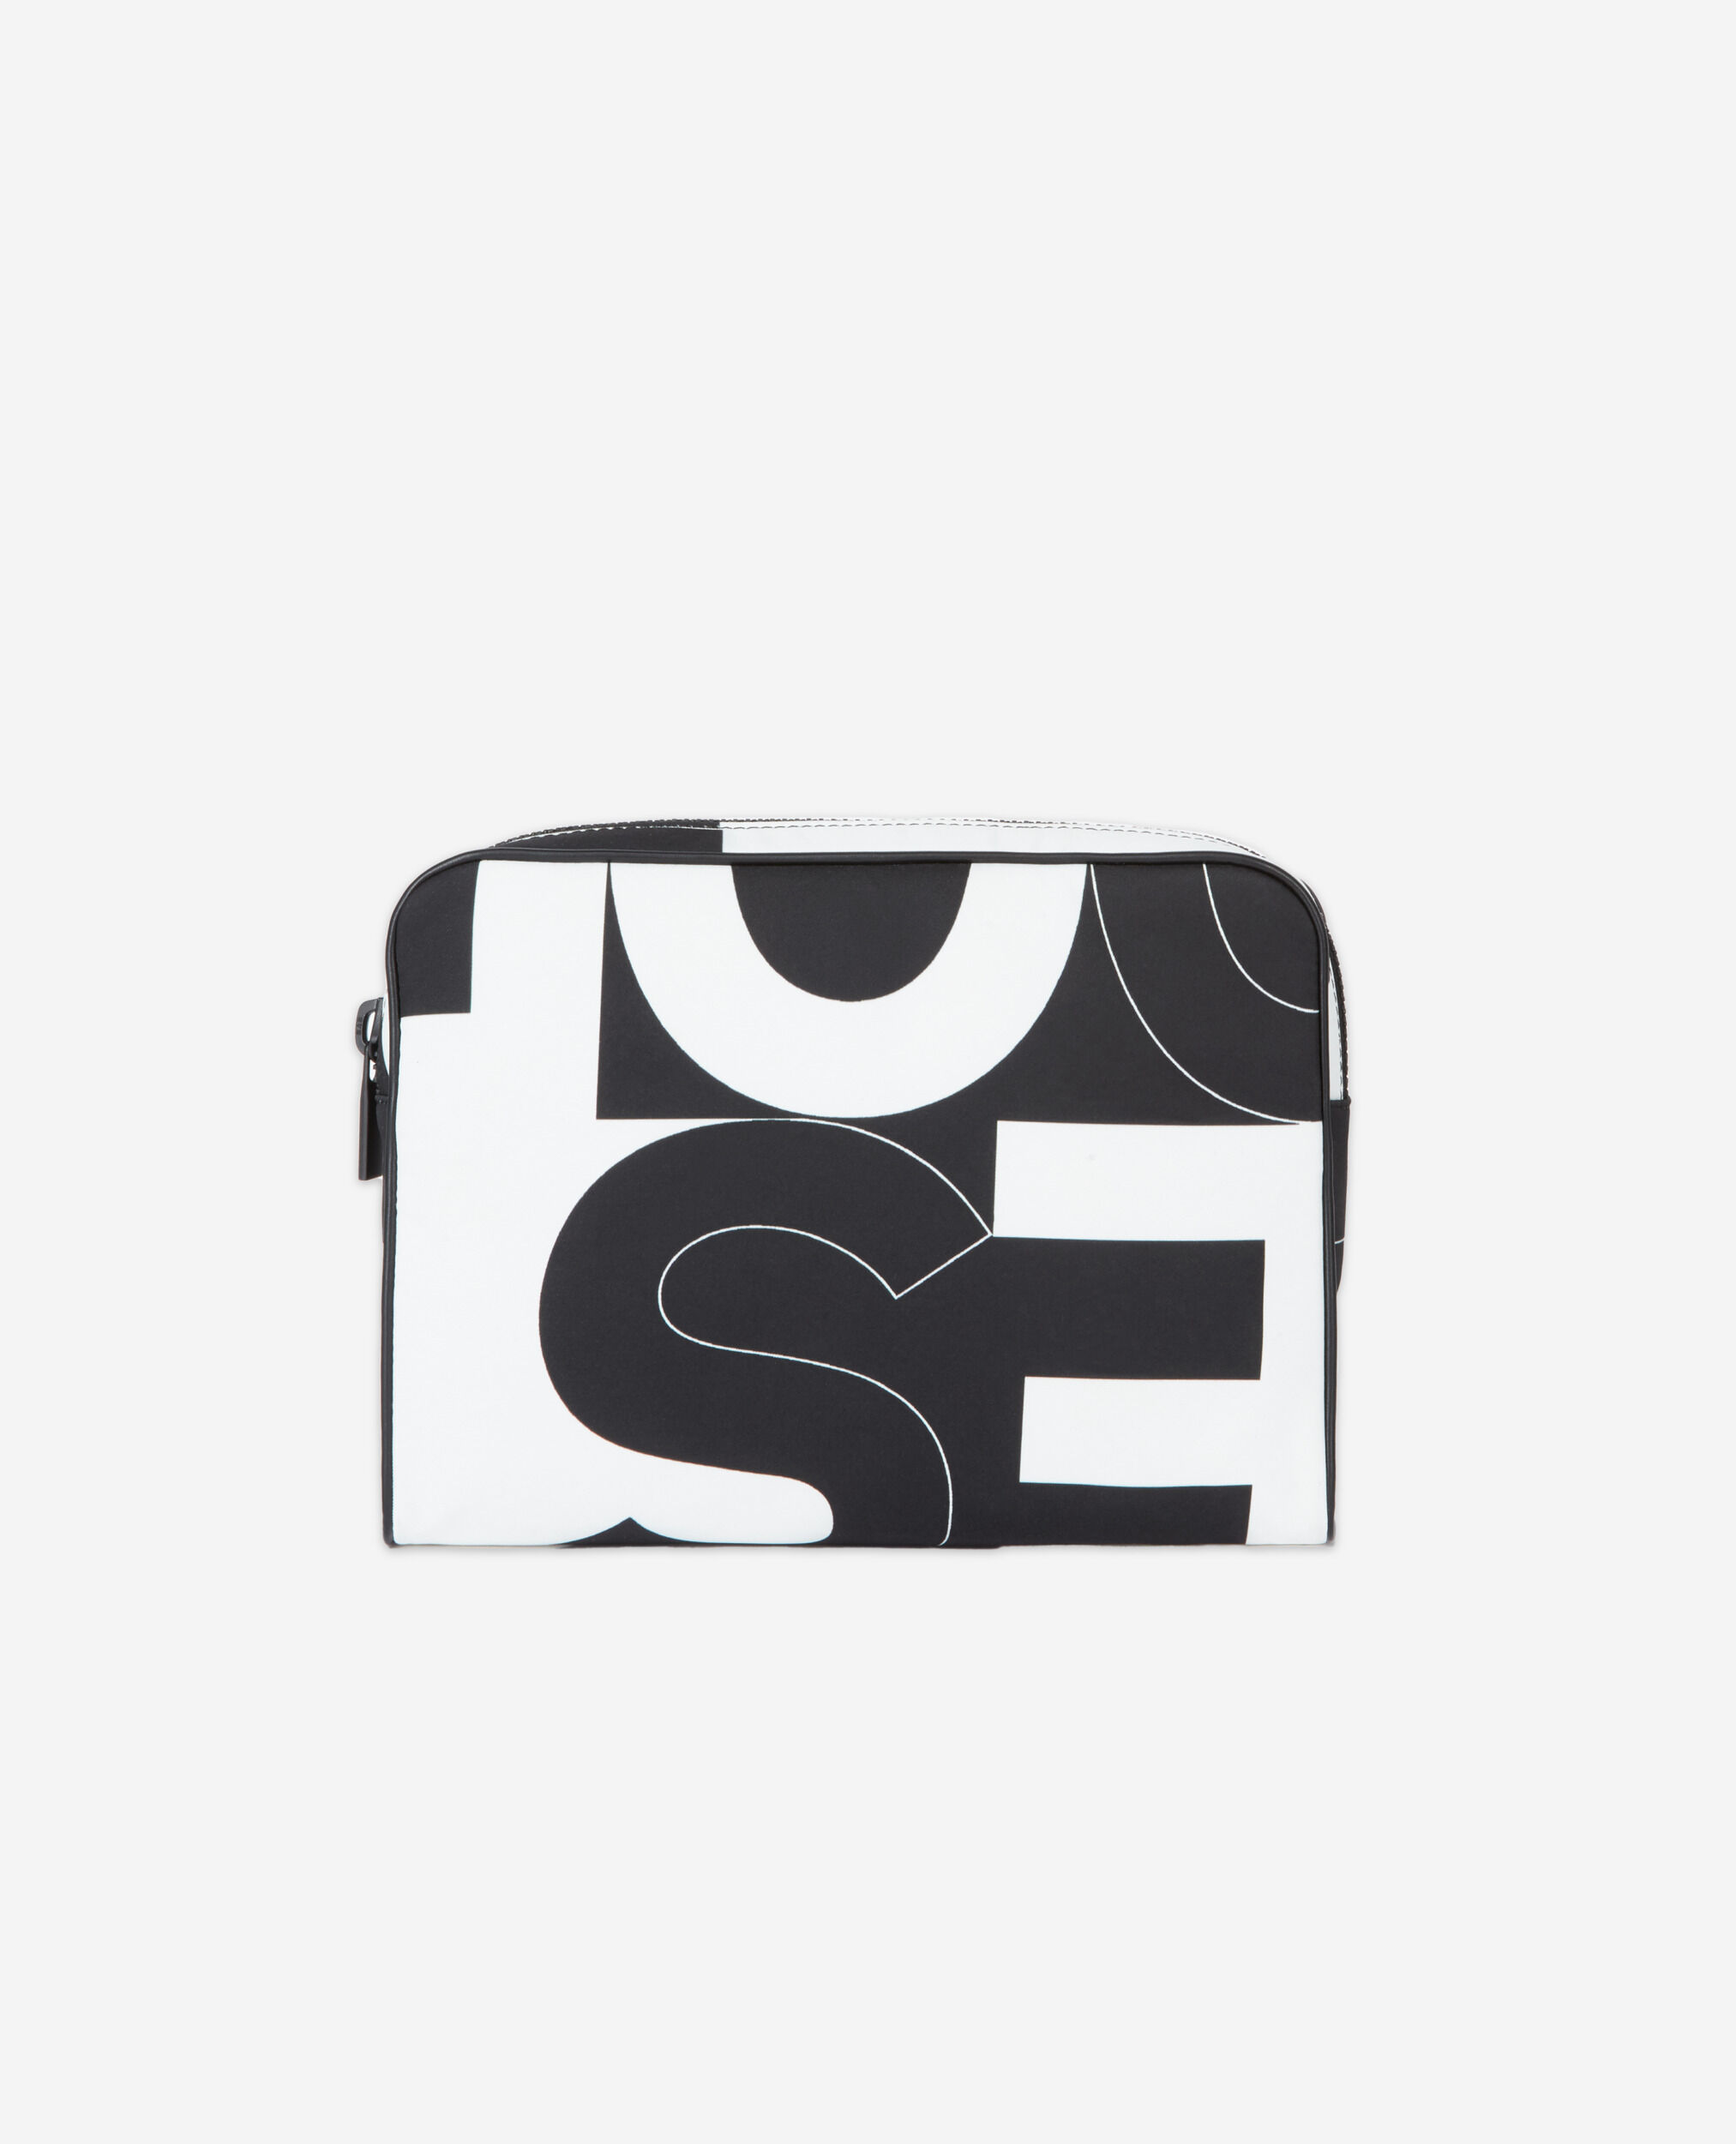 Bolso mano logotipo The Kooples, BLACK / WHITE, hi-res image number null